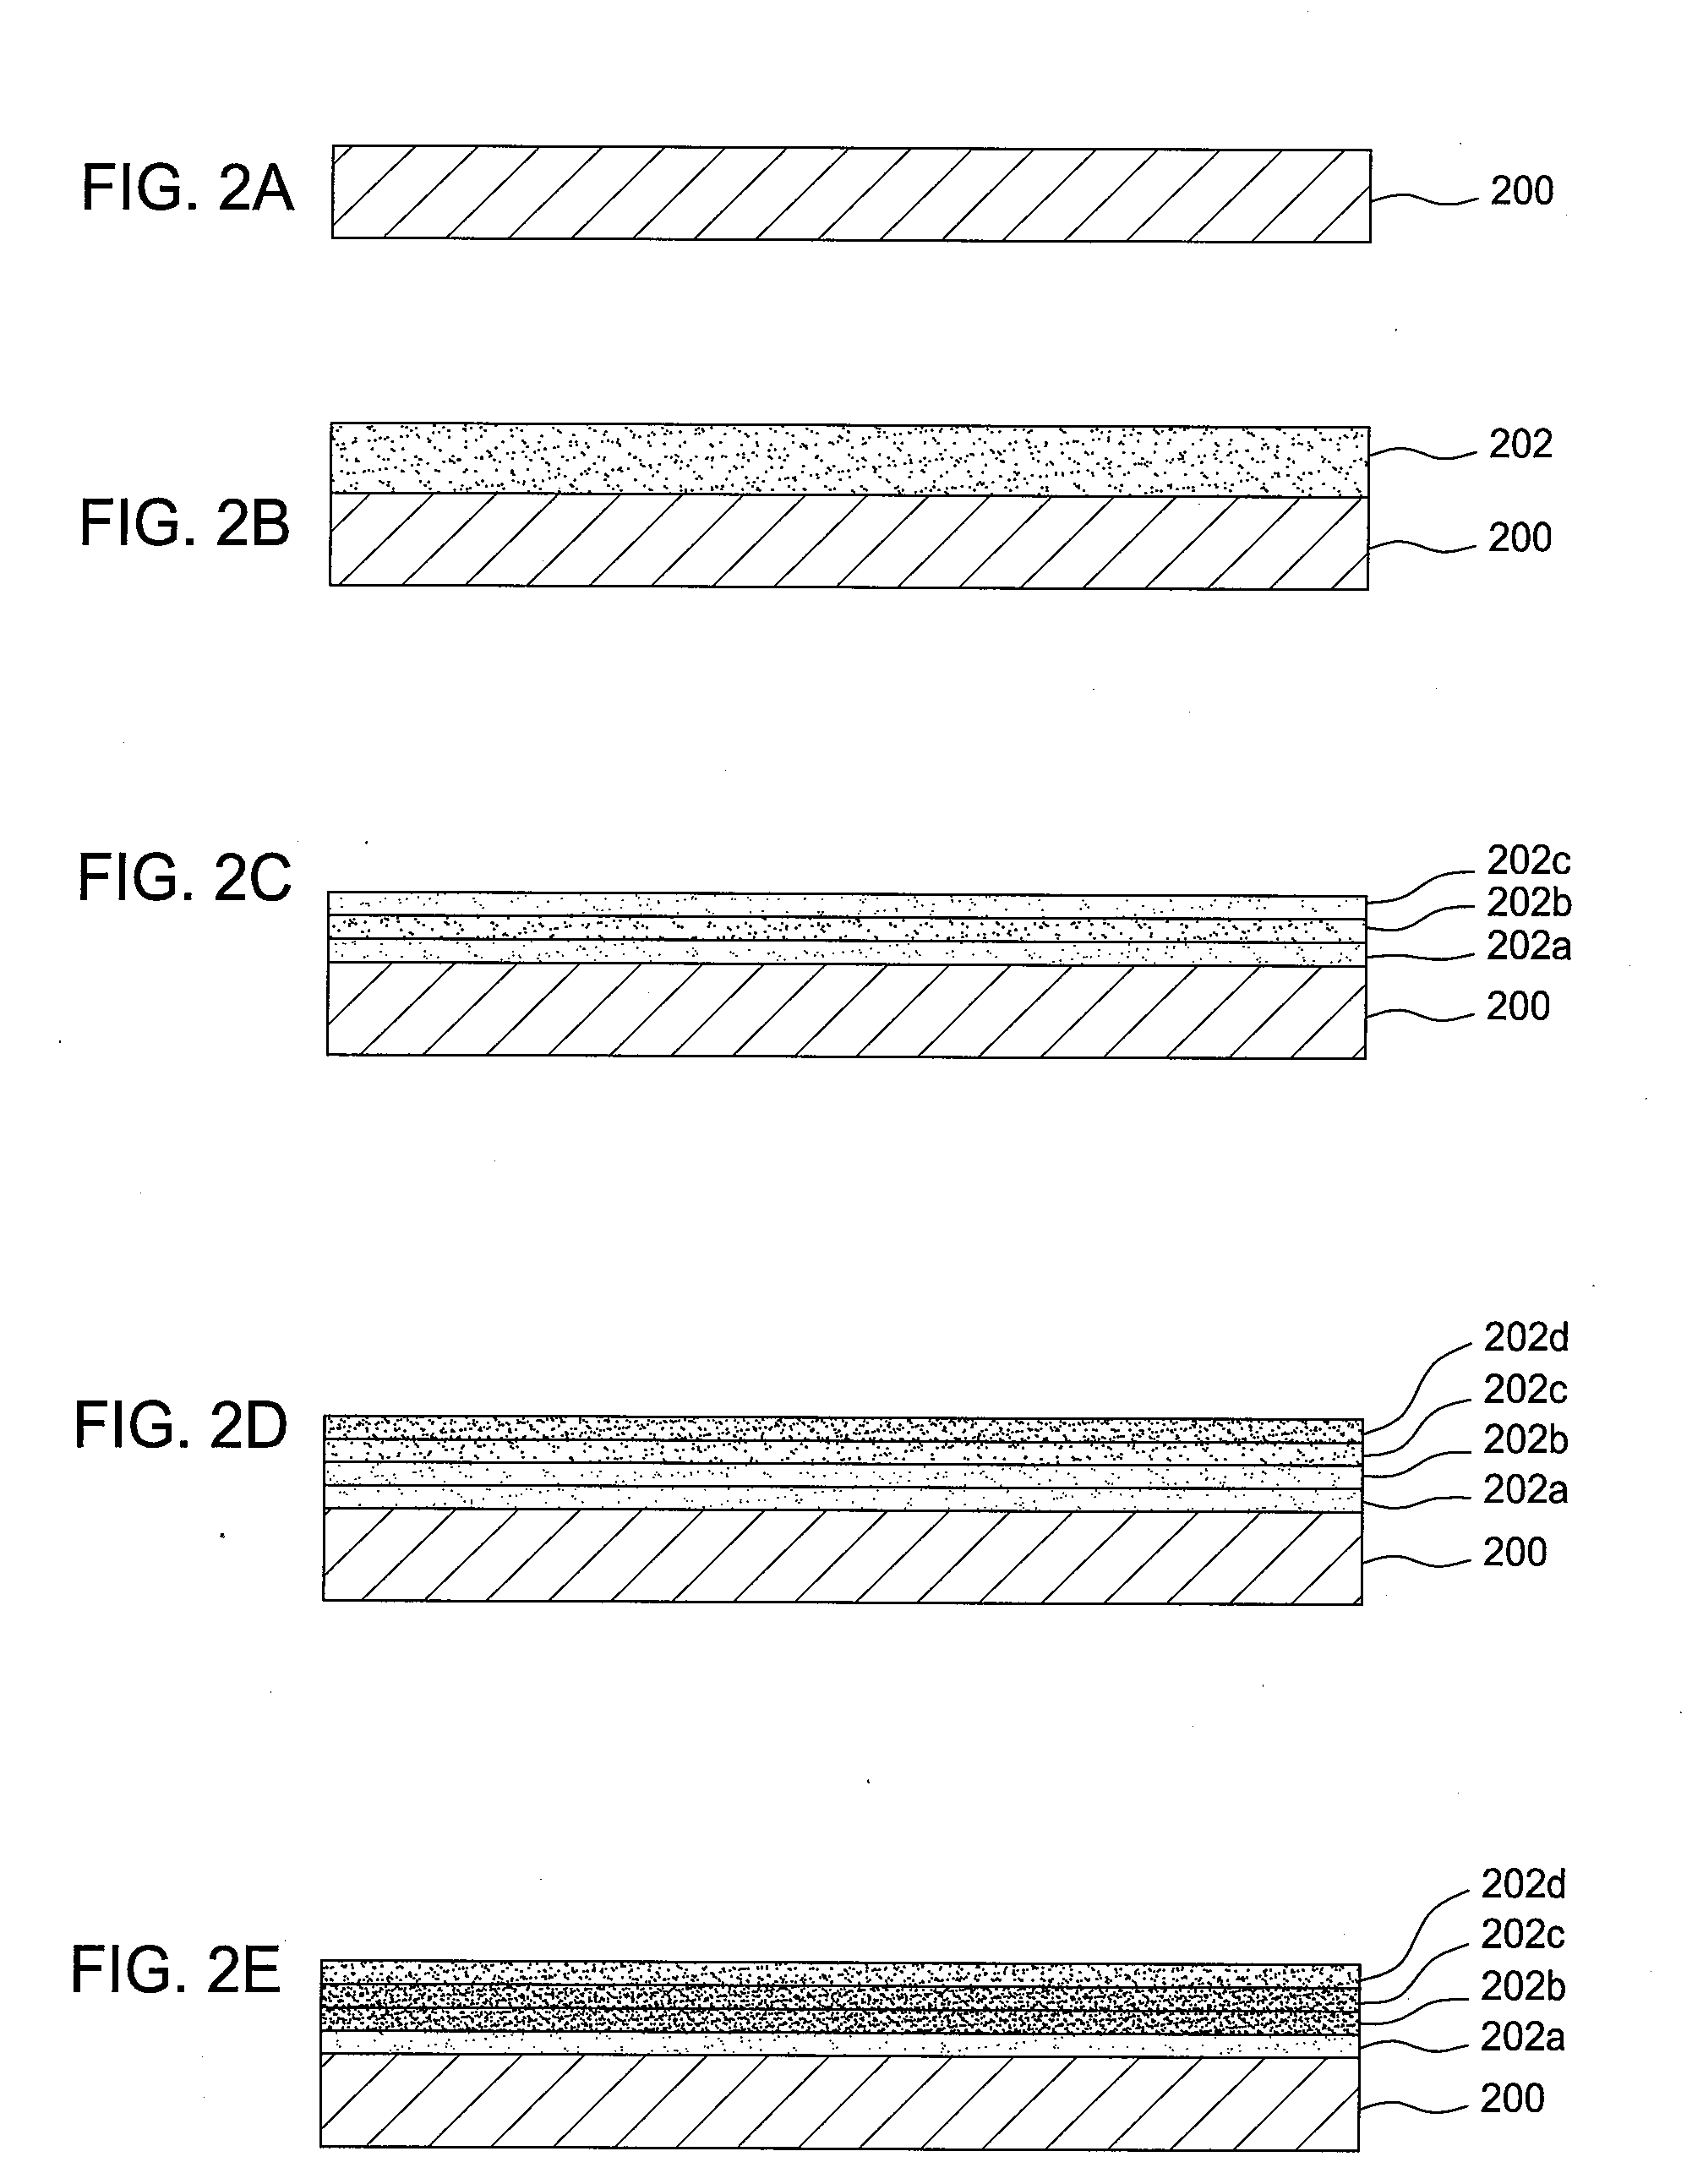 CMOS sion gate dielectric performance with double plasma nitridation containing noble gas